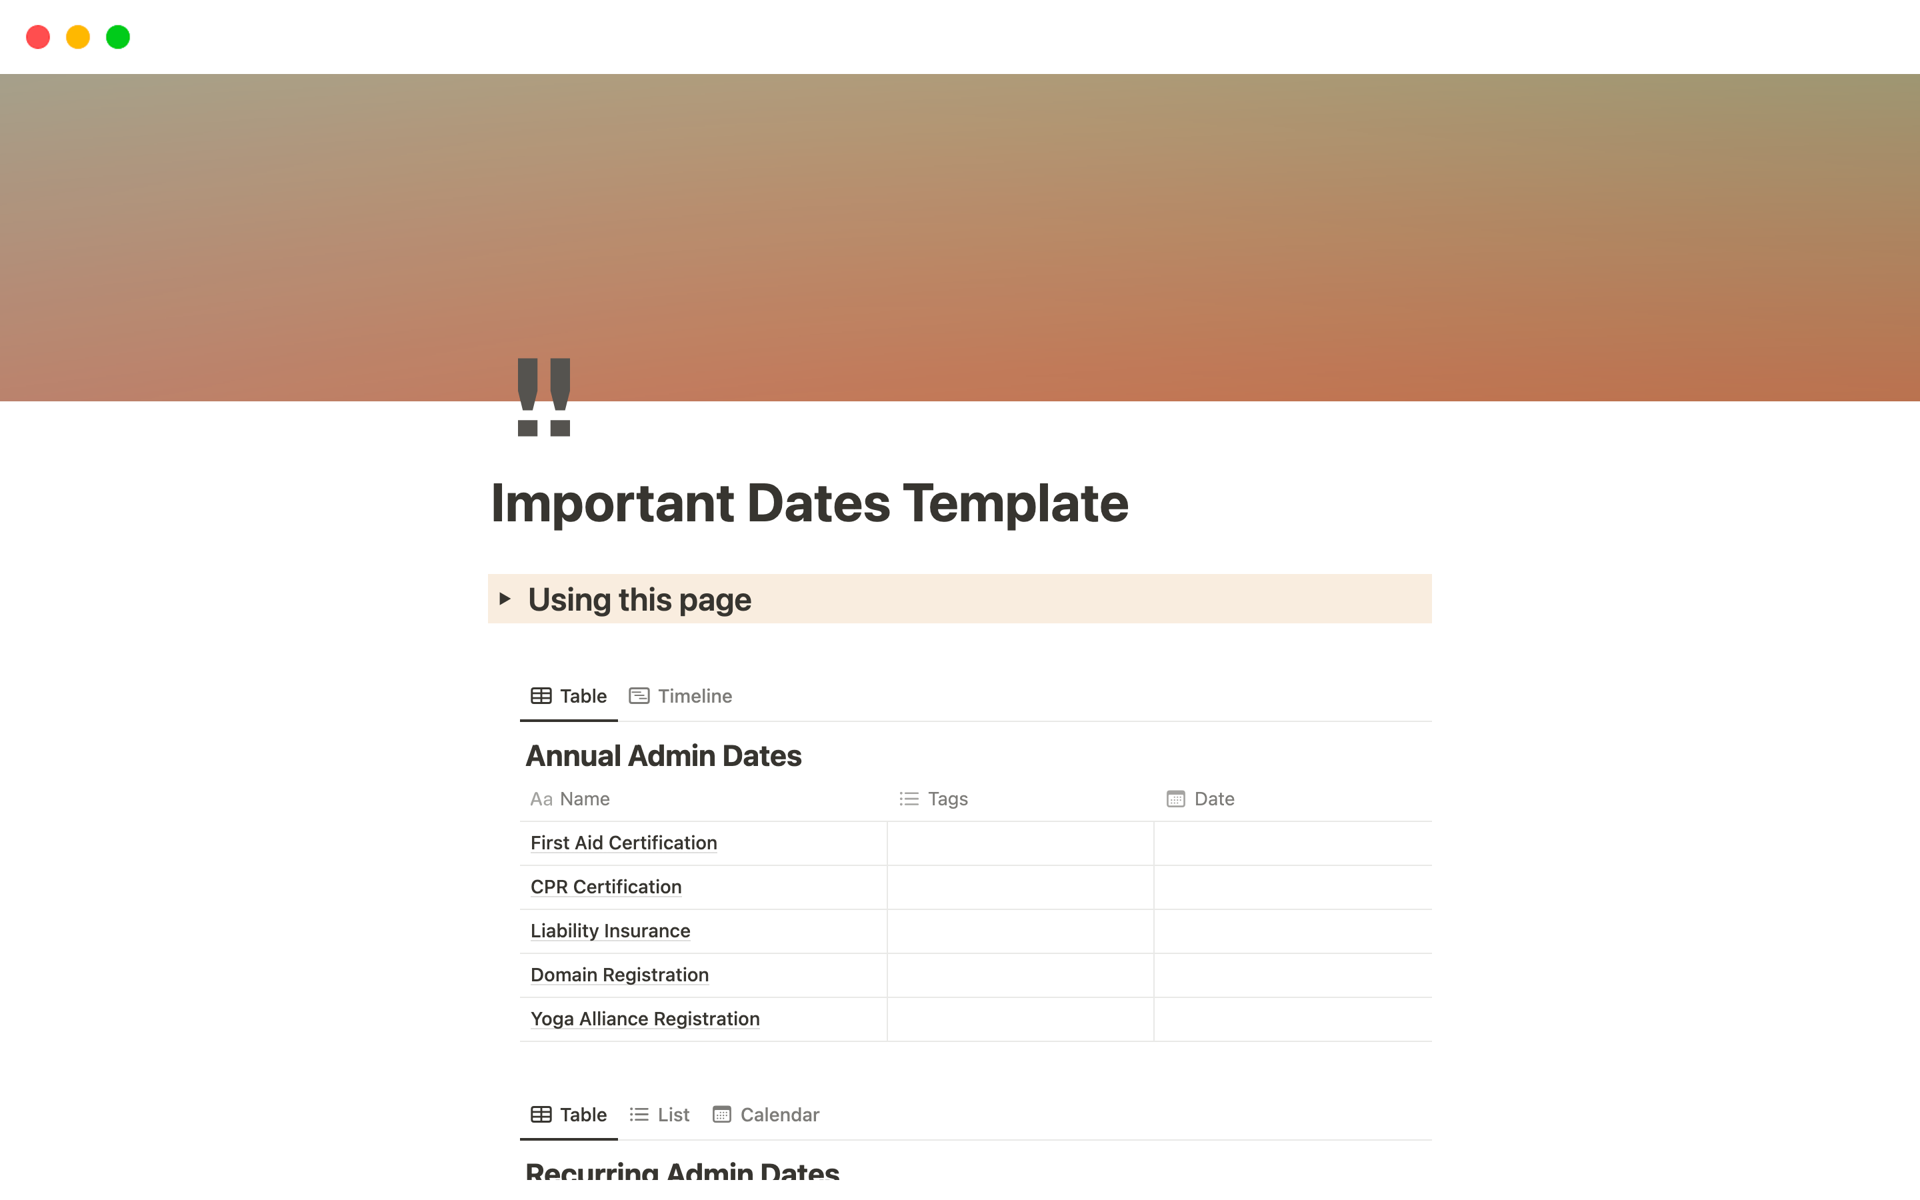 Here is a handy tool to store all of the dates that come up for you to remember.